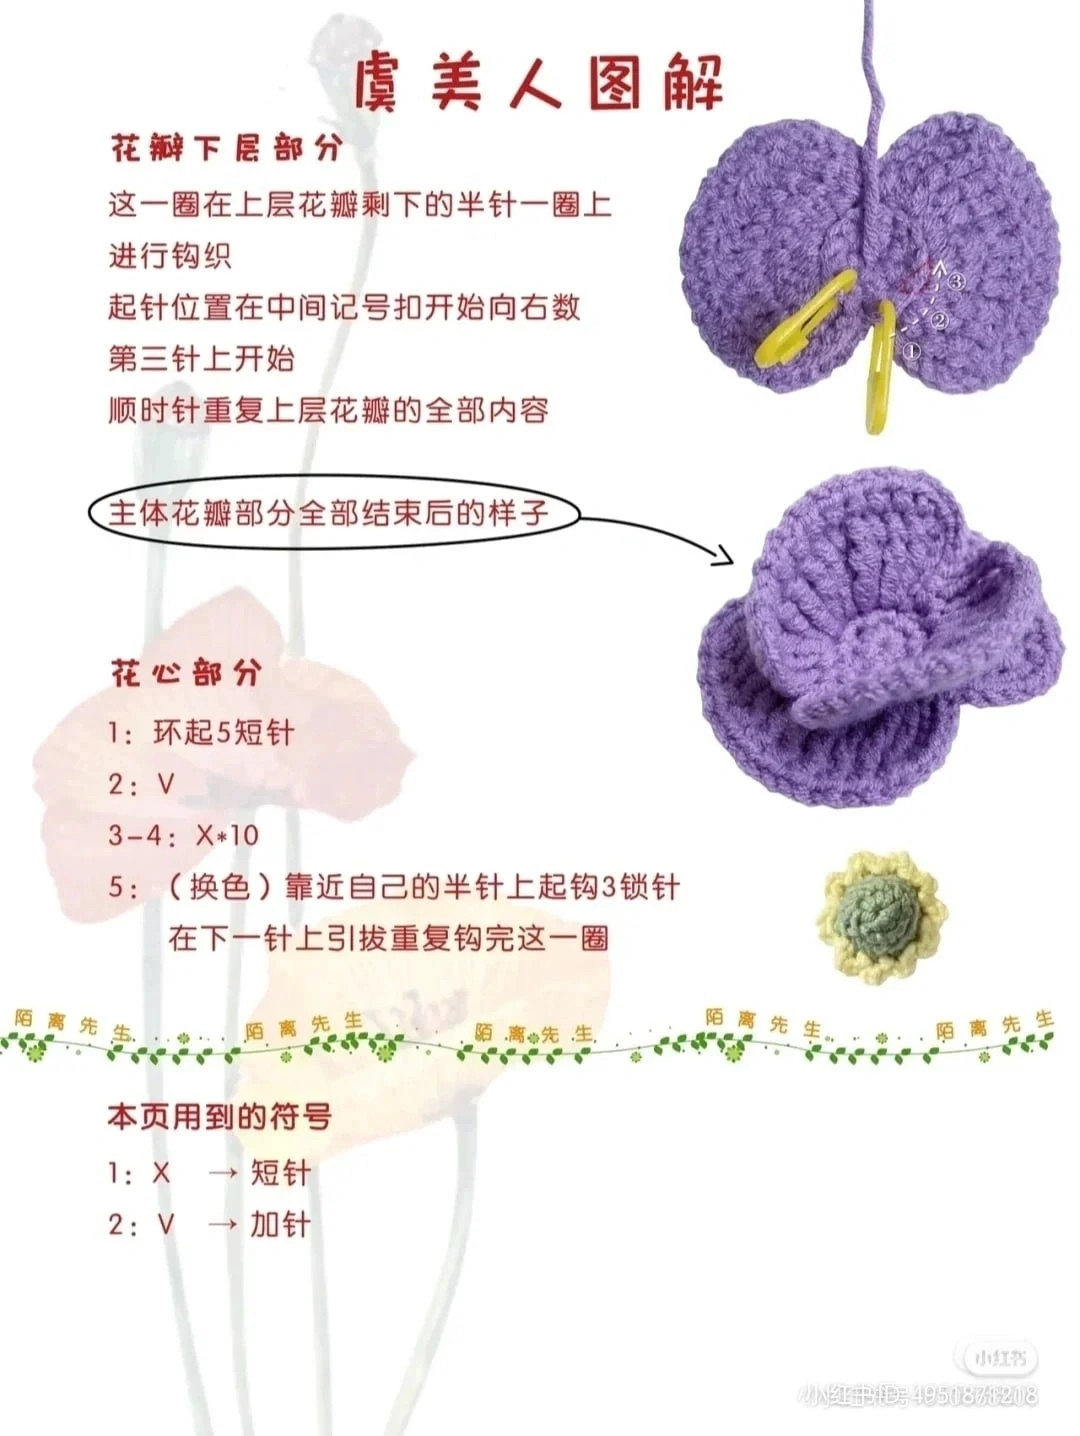 Collection of 15 flower patterns for beginners to crochet